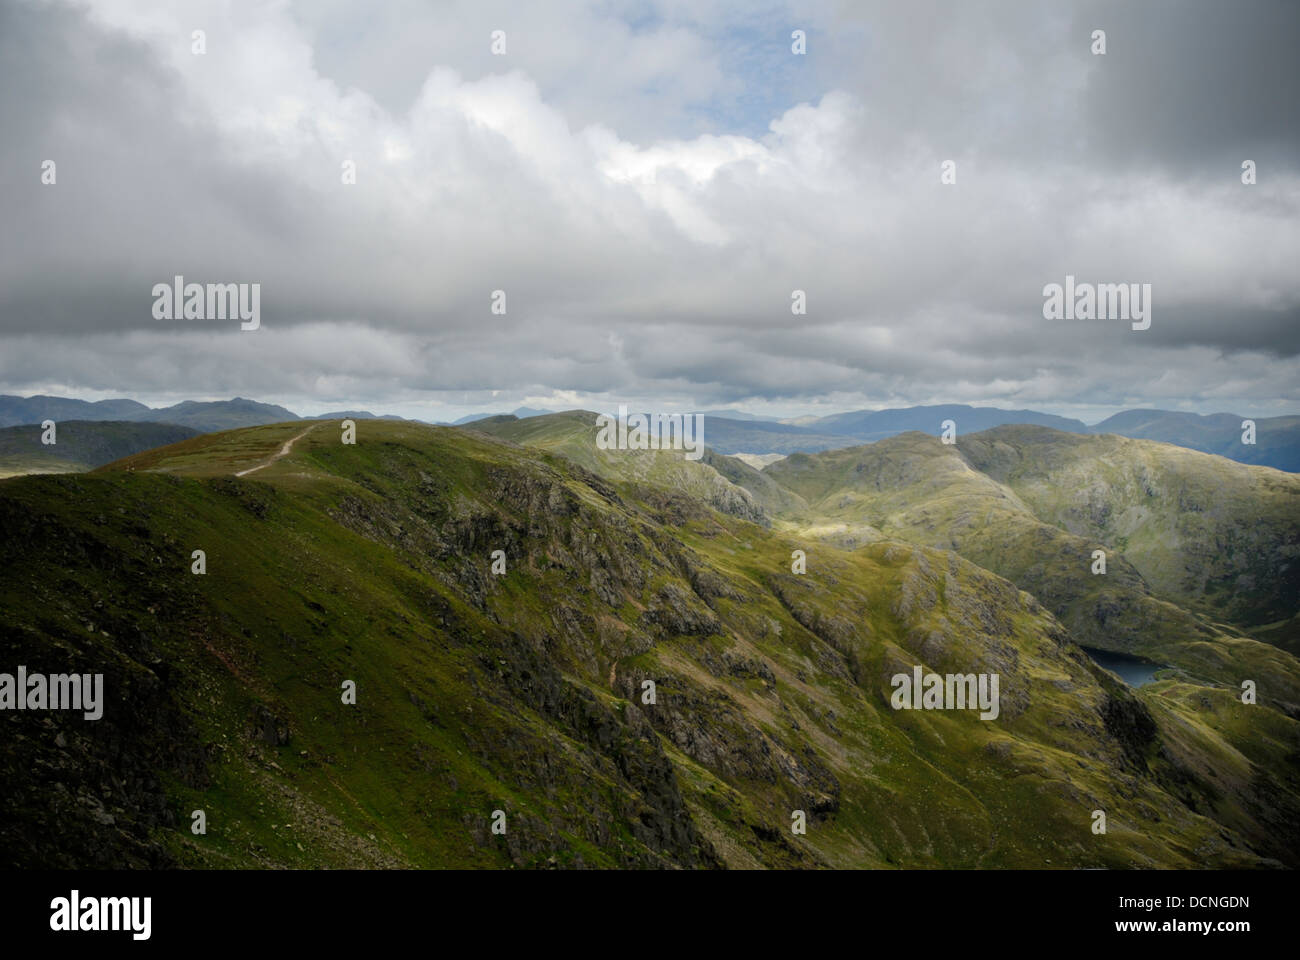 View from the top of Old man Coniston,Mountain,The Lake District National Park,UK Stock Photo